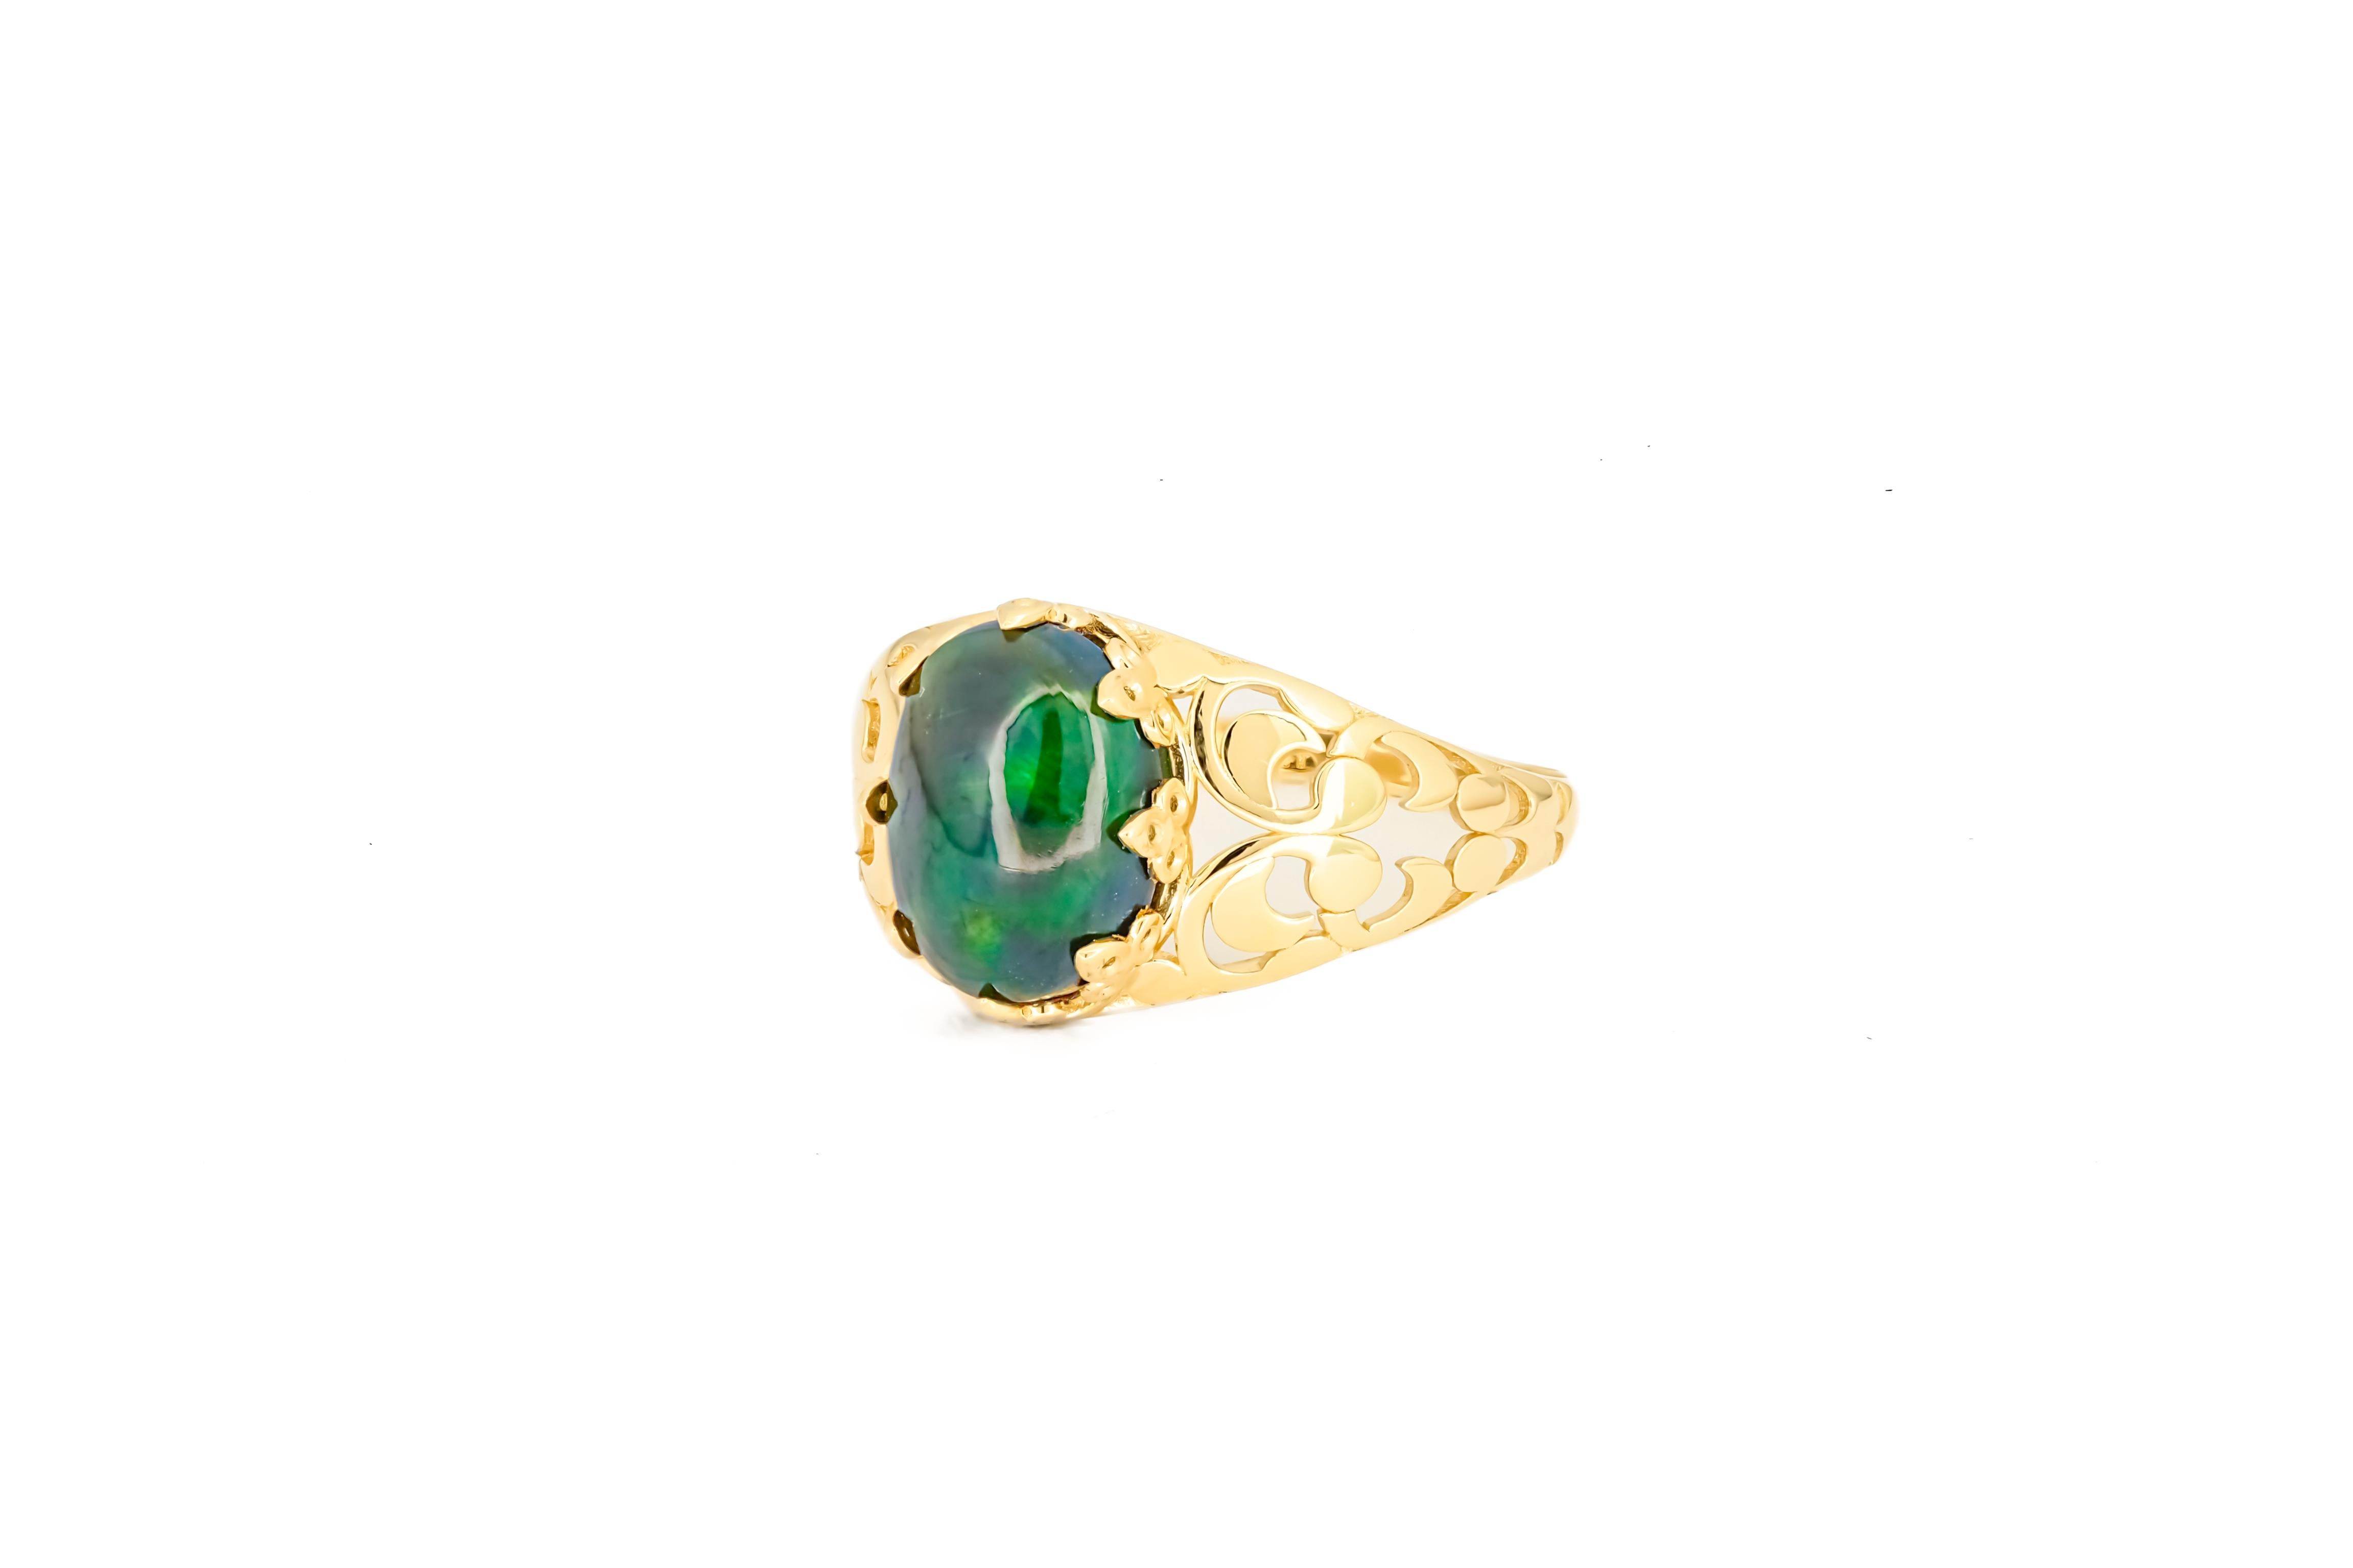 For Sale:  Black Opal Vitage Style Ring in 14 Karat Gold, Ethiopian Opal Cabochon Ring 6